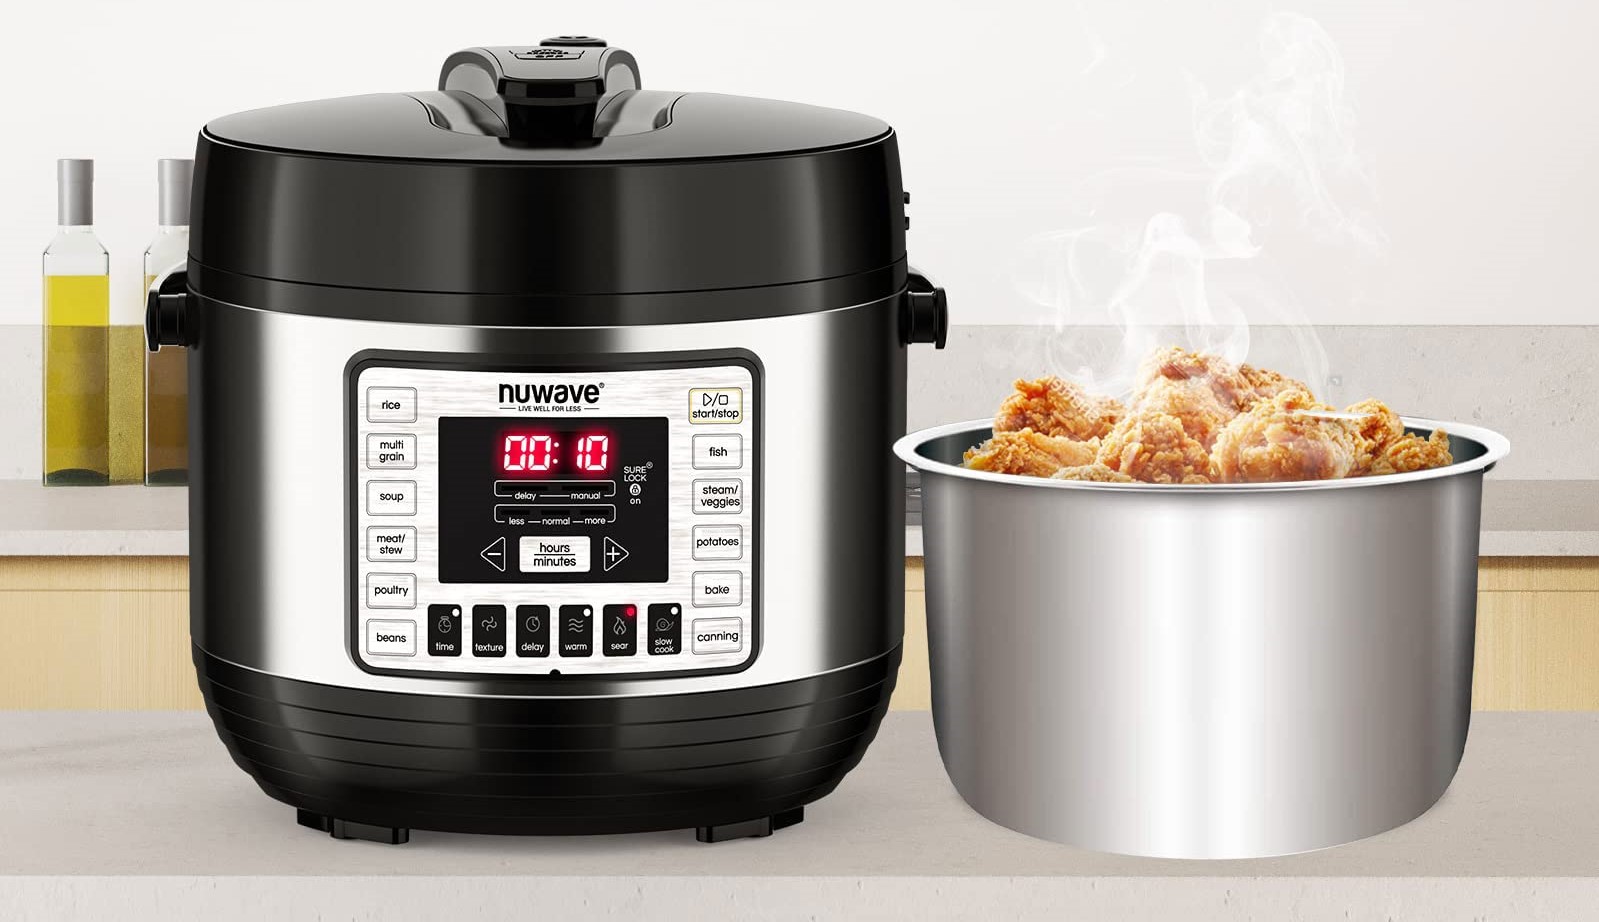 How Do You Use The Nuwave Nutri-Pot Electric Pressure Cooker